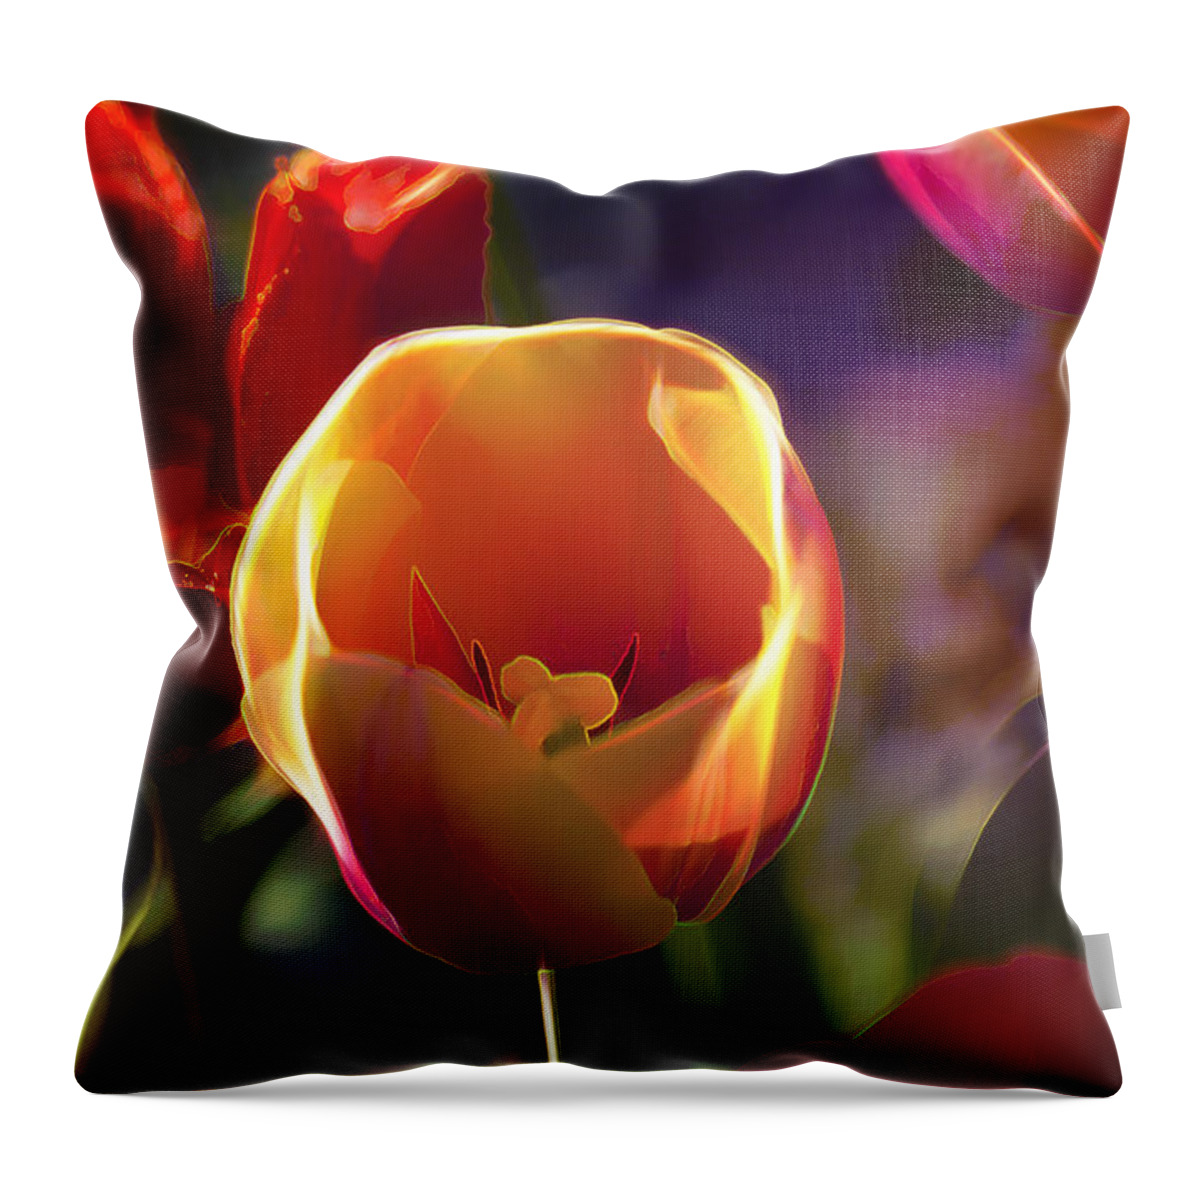 Flowers Throw Pillow featuring the photograph Tulips Through Rose Colored Glass by Bill and Linda Tiepelman